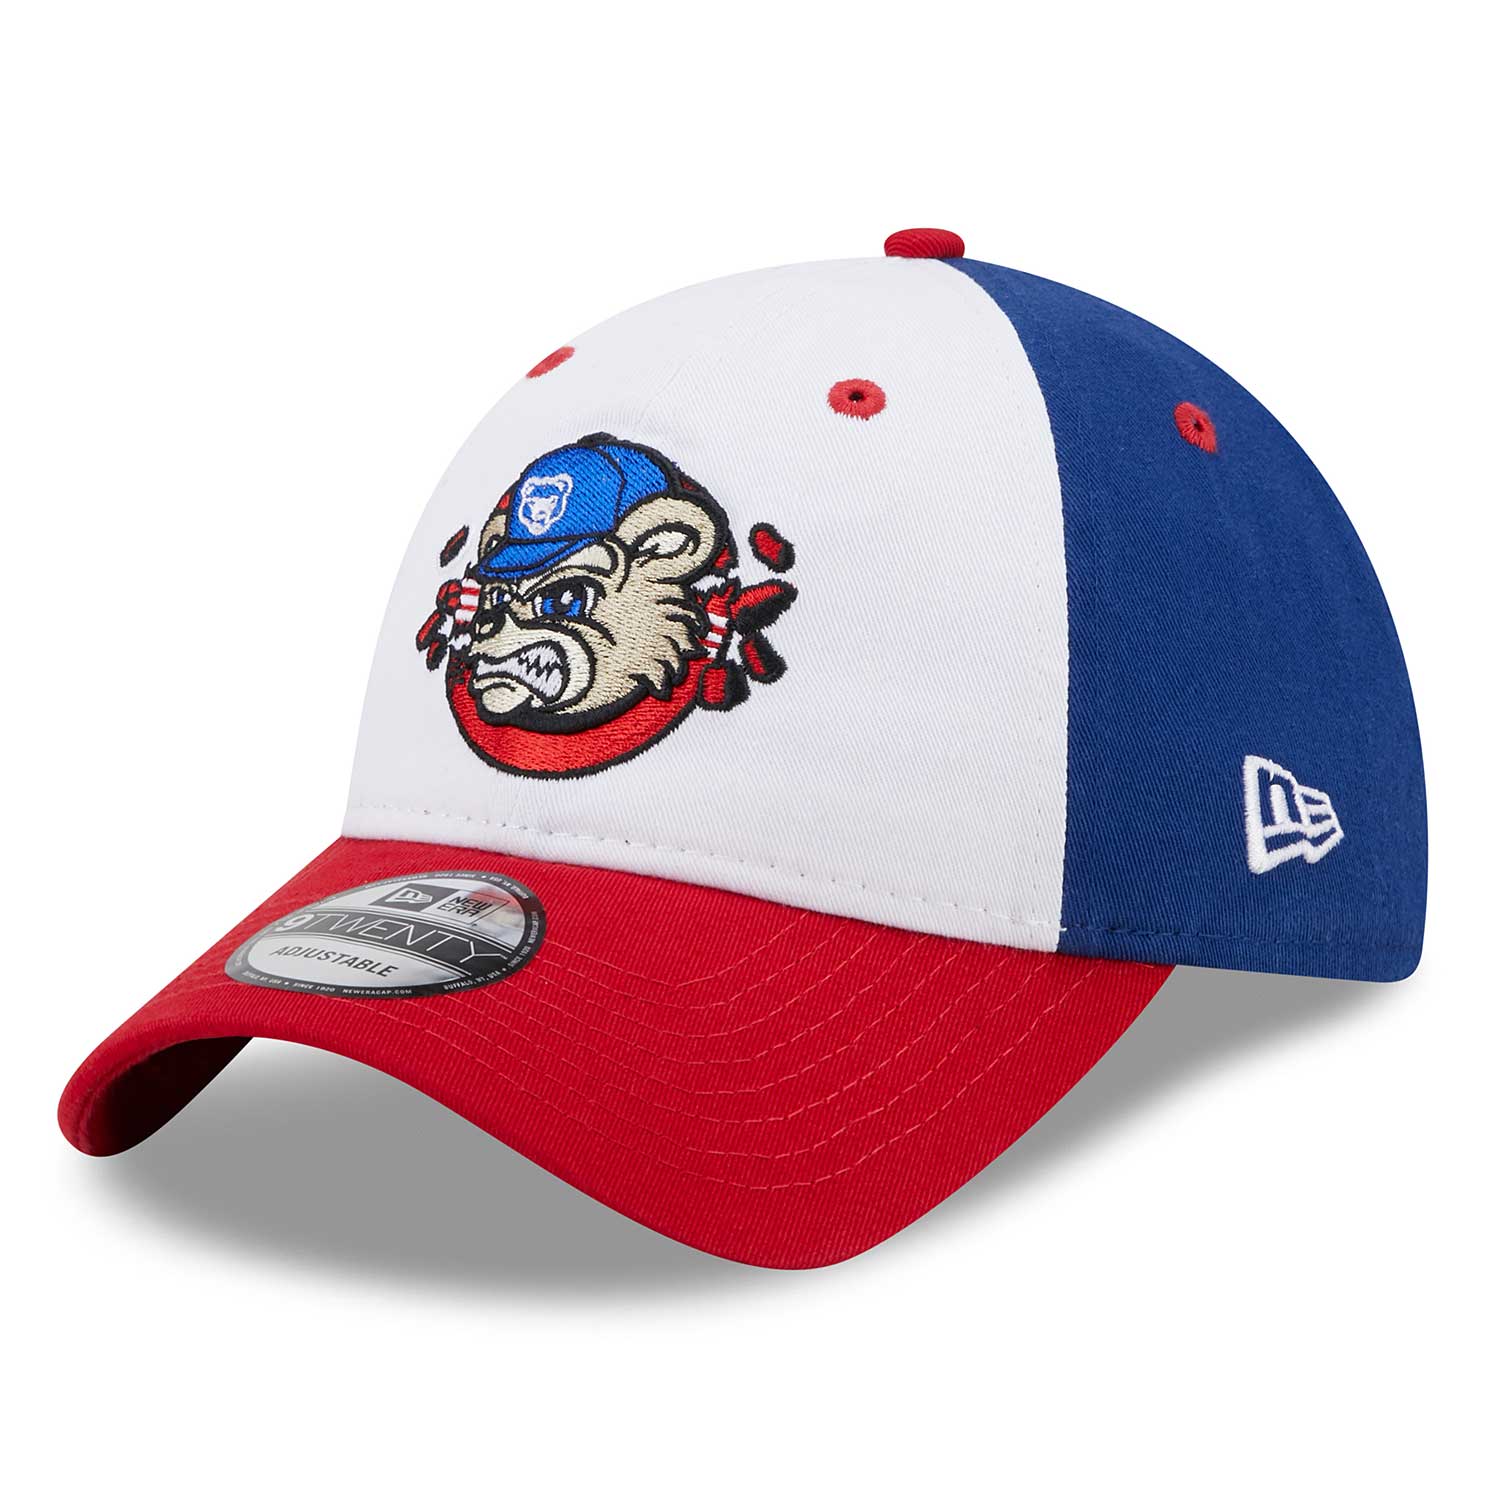 South Bend Cubs Youth Choice Snapback Cap